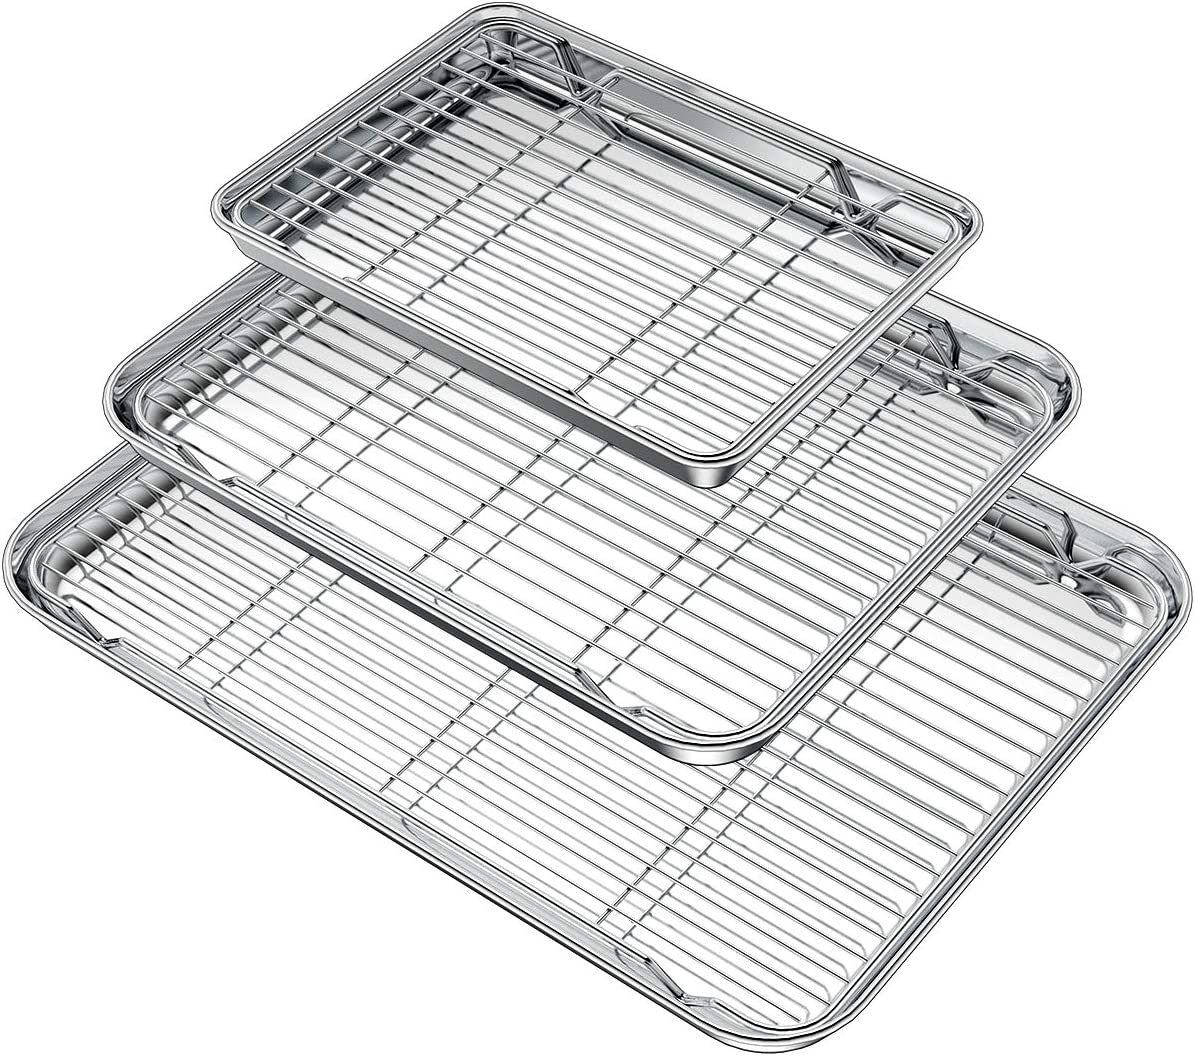 9 Inch Toaster Oven Tray and Rack Set, Small Stainless Steel Baking Pan  with Cooling Rack,Dishwasher Safe Baking Sheet